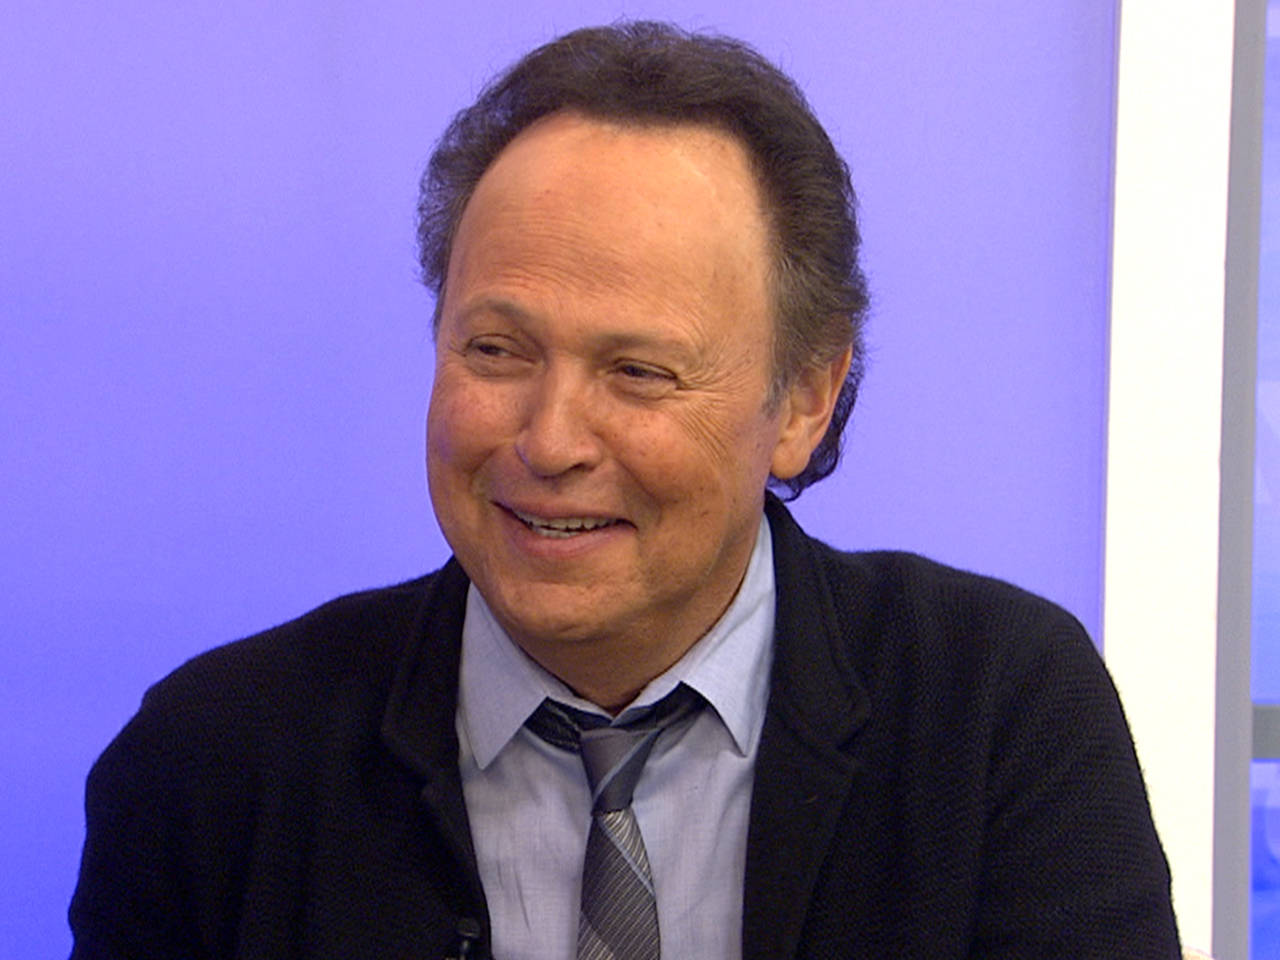 Billy Crystal's 65th birthday interview on The Today Show. Wallpaper